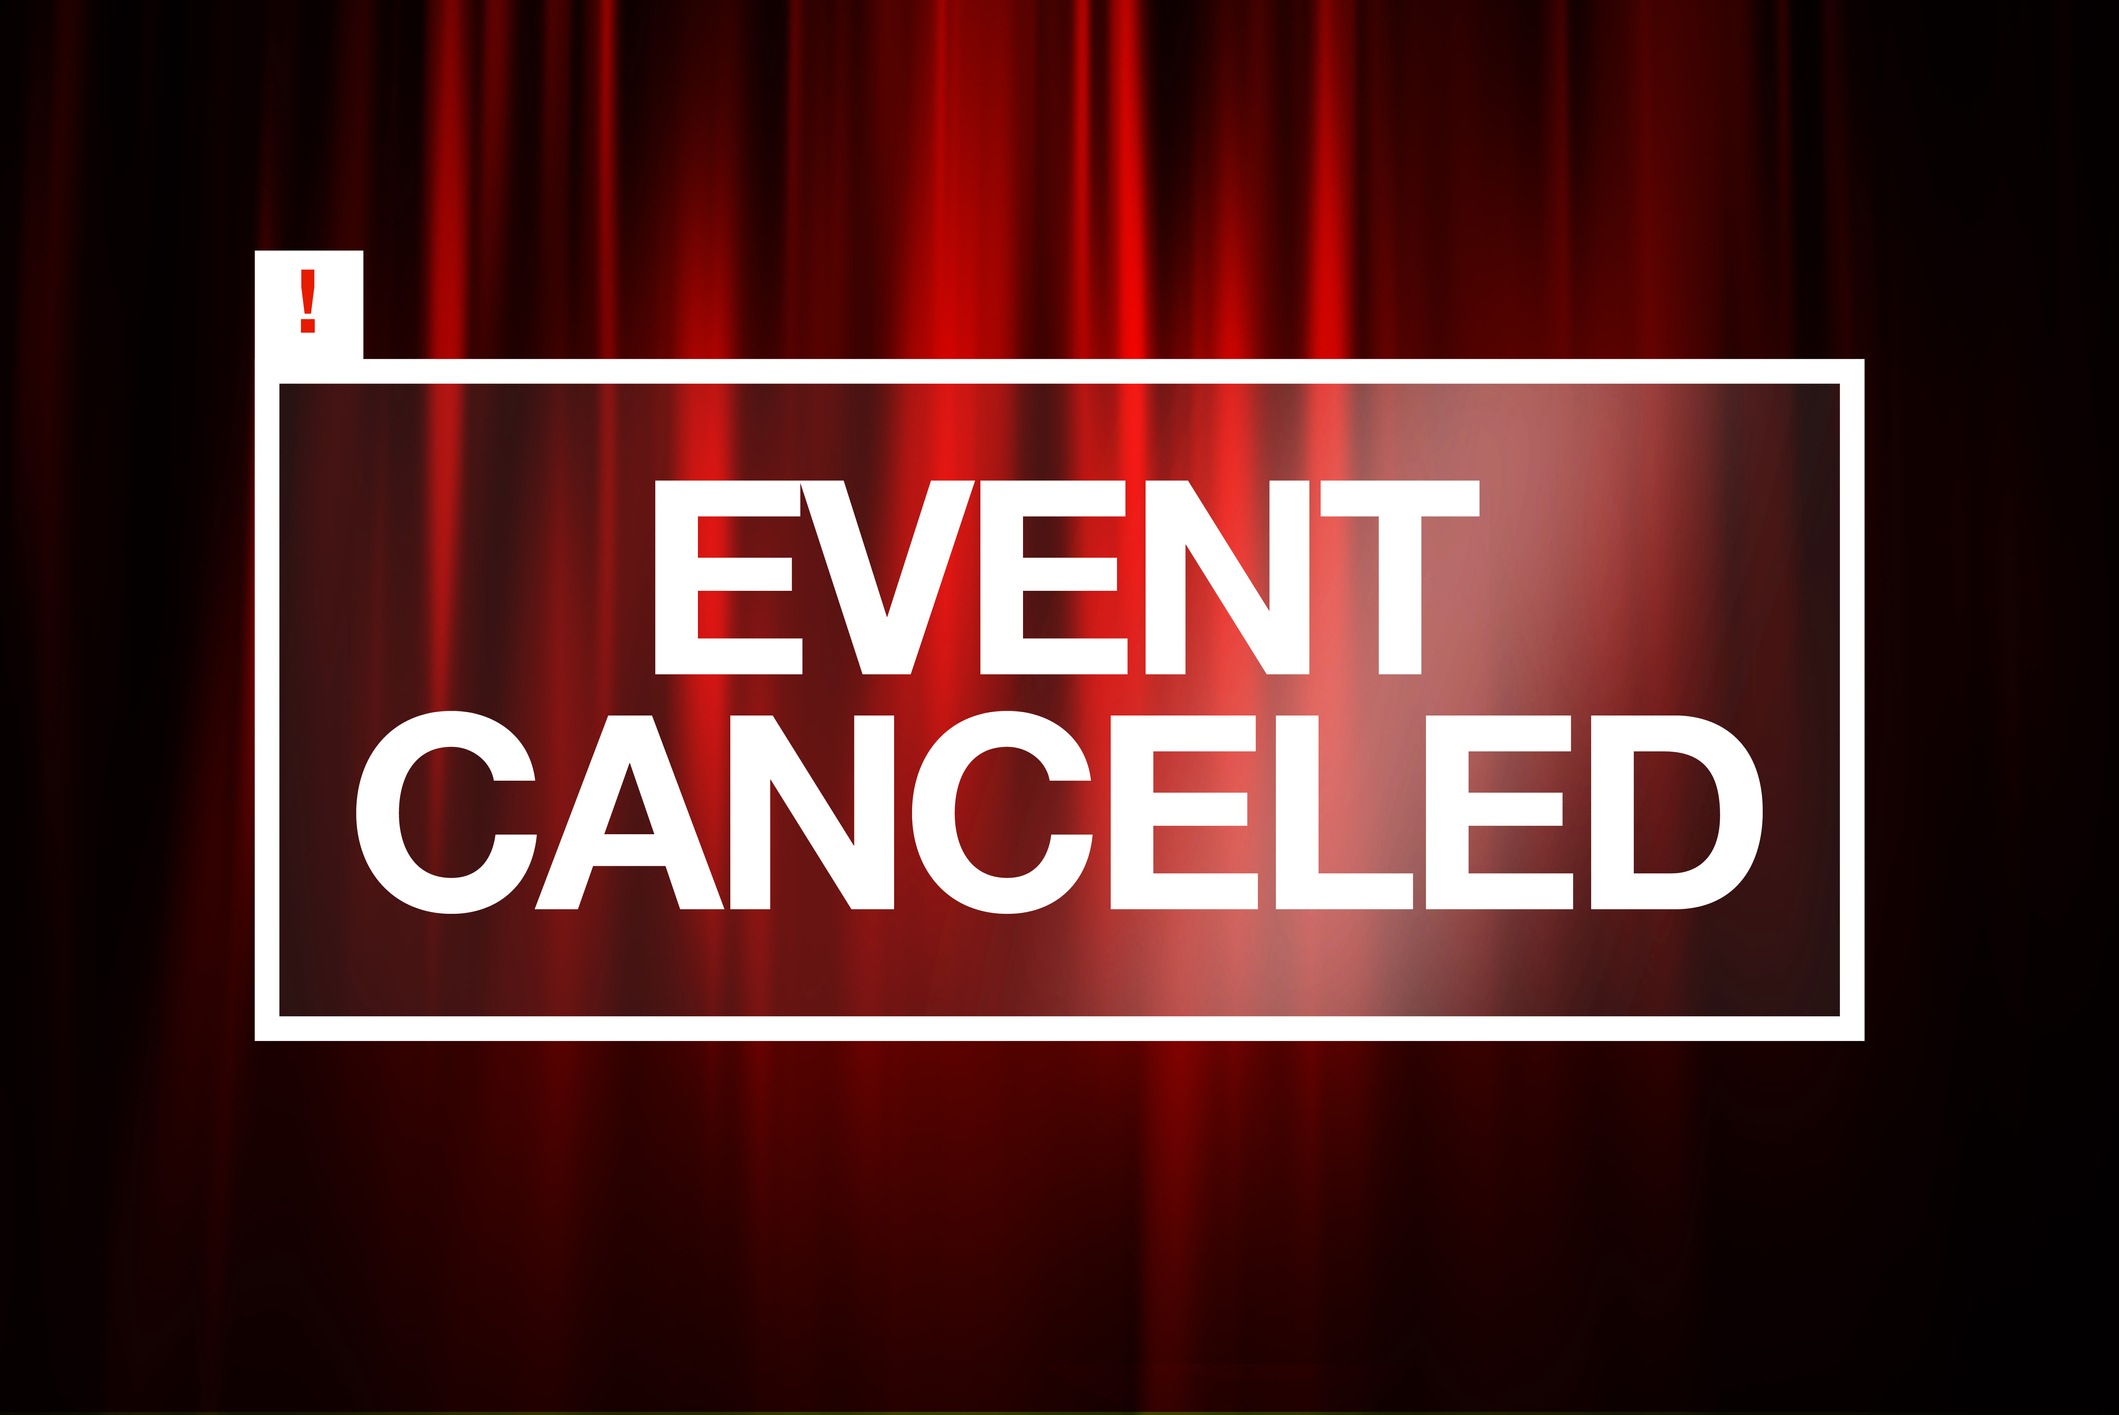 Canceled Events